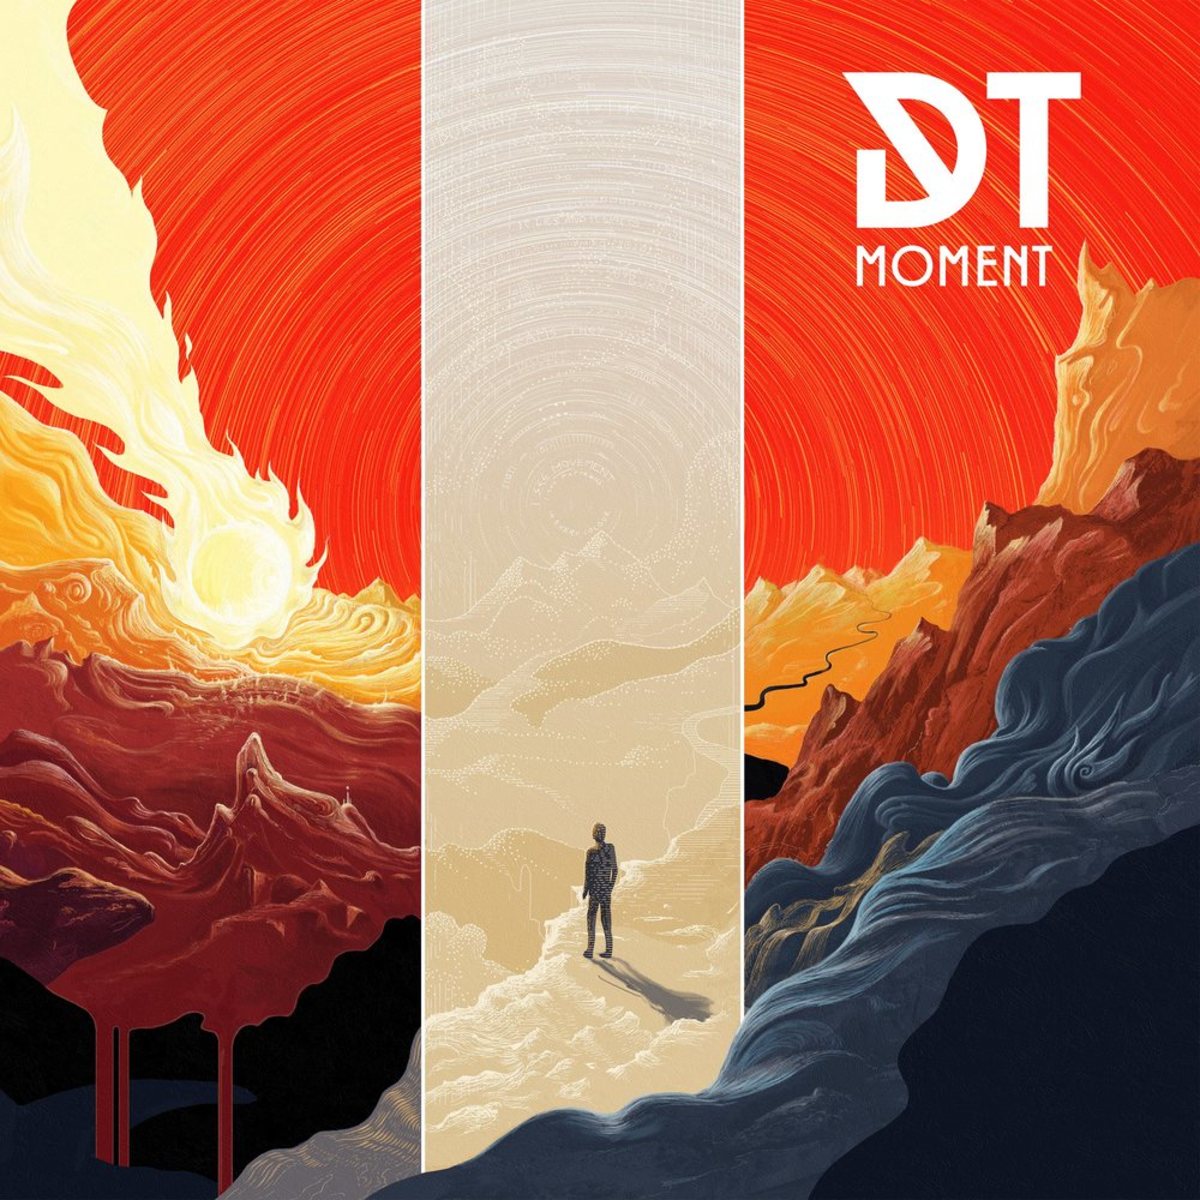 a-review-of-the-album-moment-by-swedish-melodic-death-metal-band-dark-tranquillity